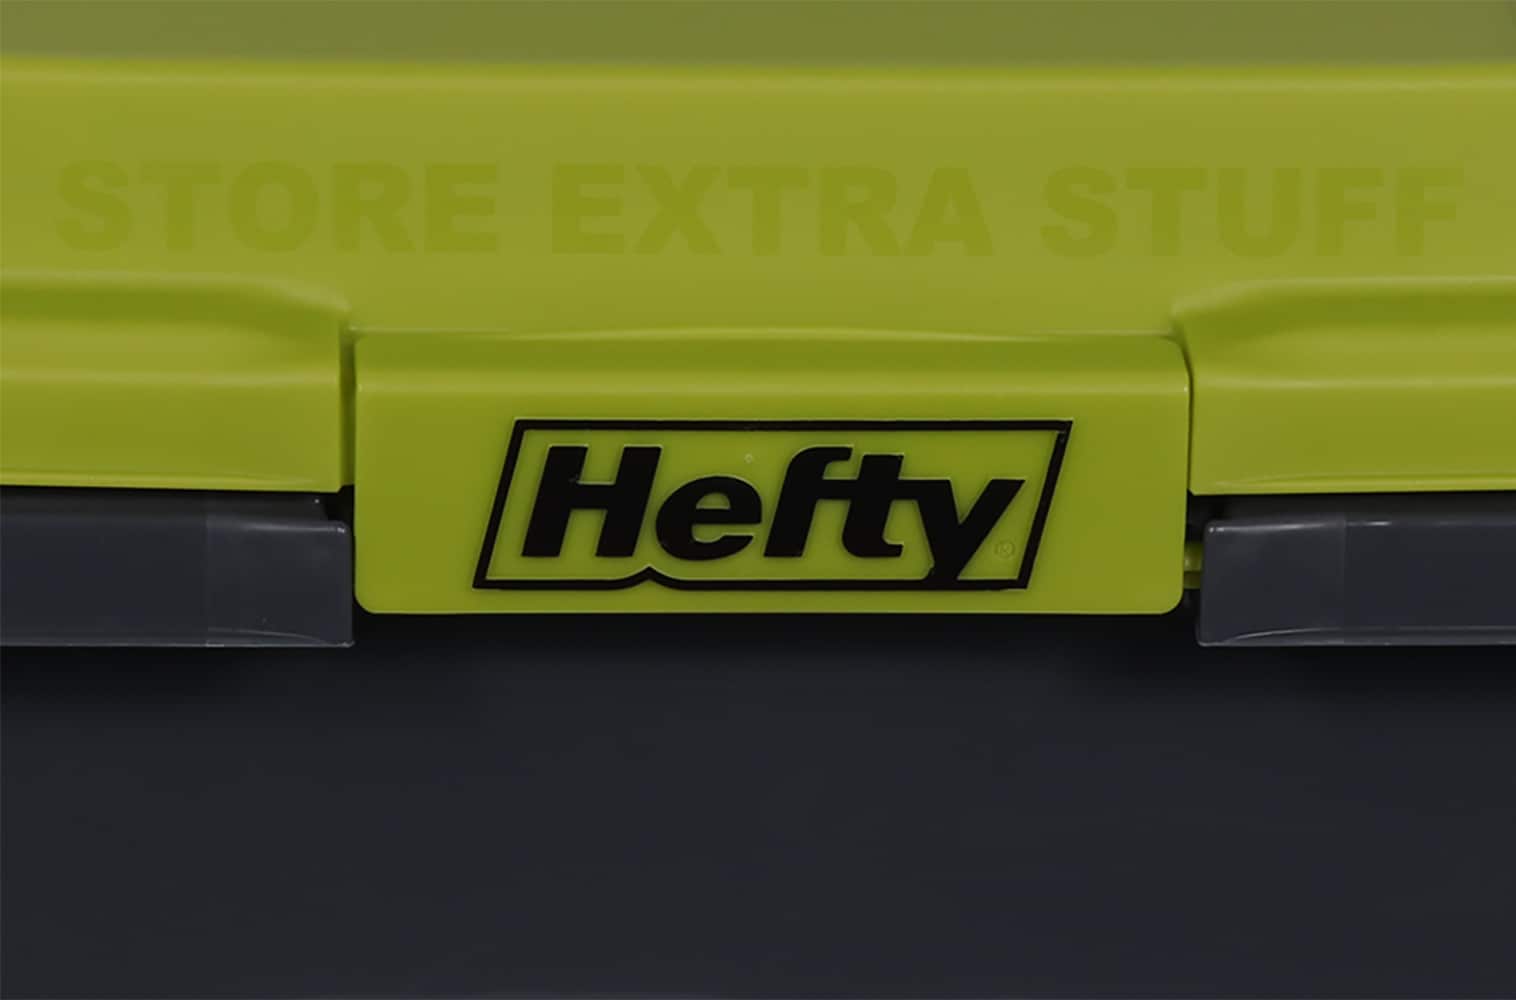 4.5-gal HI-RISE PRO™ Storage Tote — Hefty Home Solutions